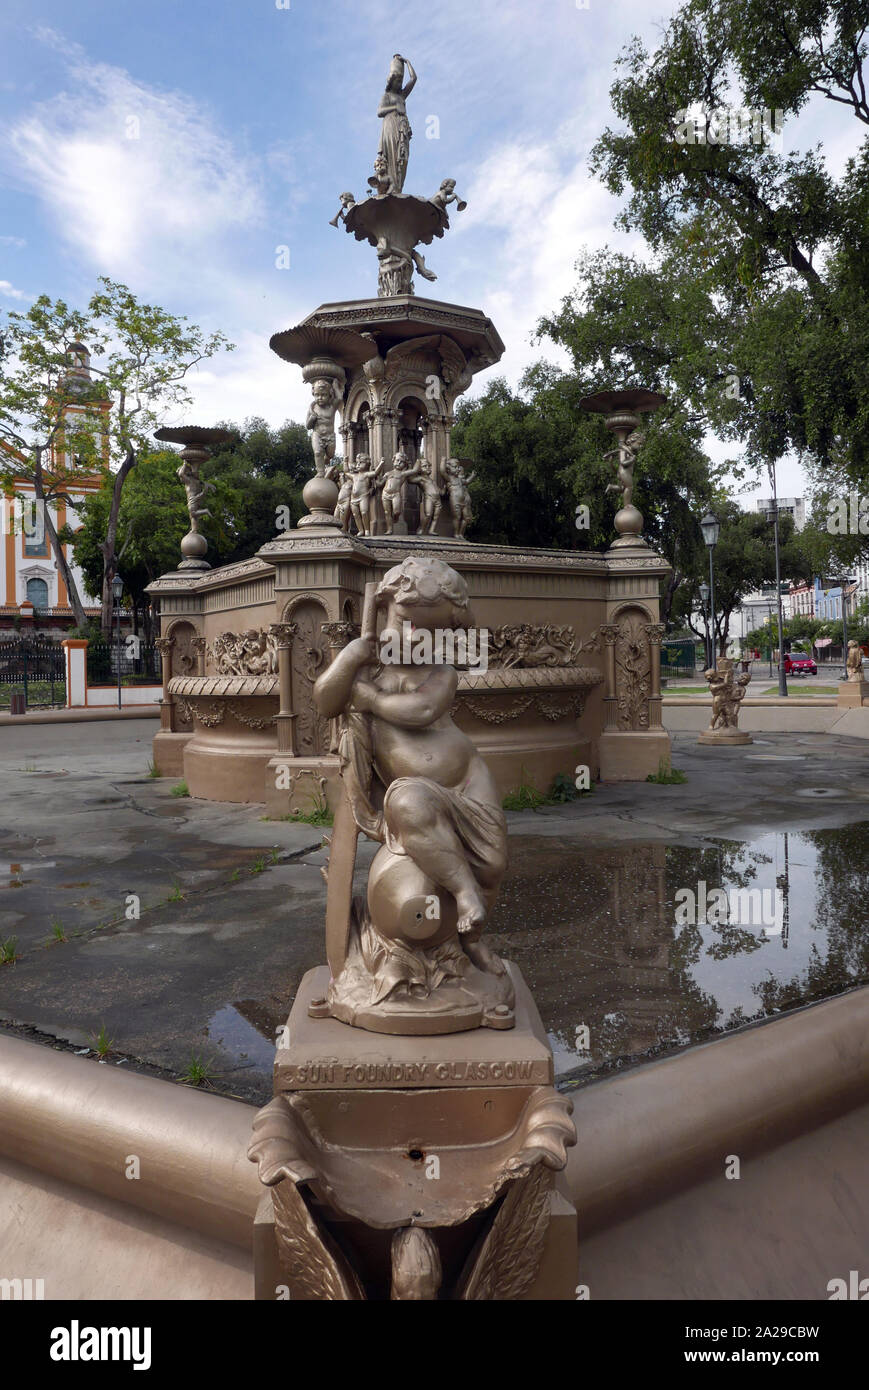 Chafariz ornamental fountain in Manaus Brazil imported from Glasgow Scotland and made by the Sun Foundry Stock Photo